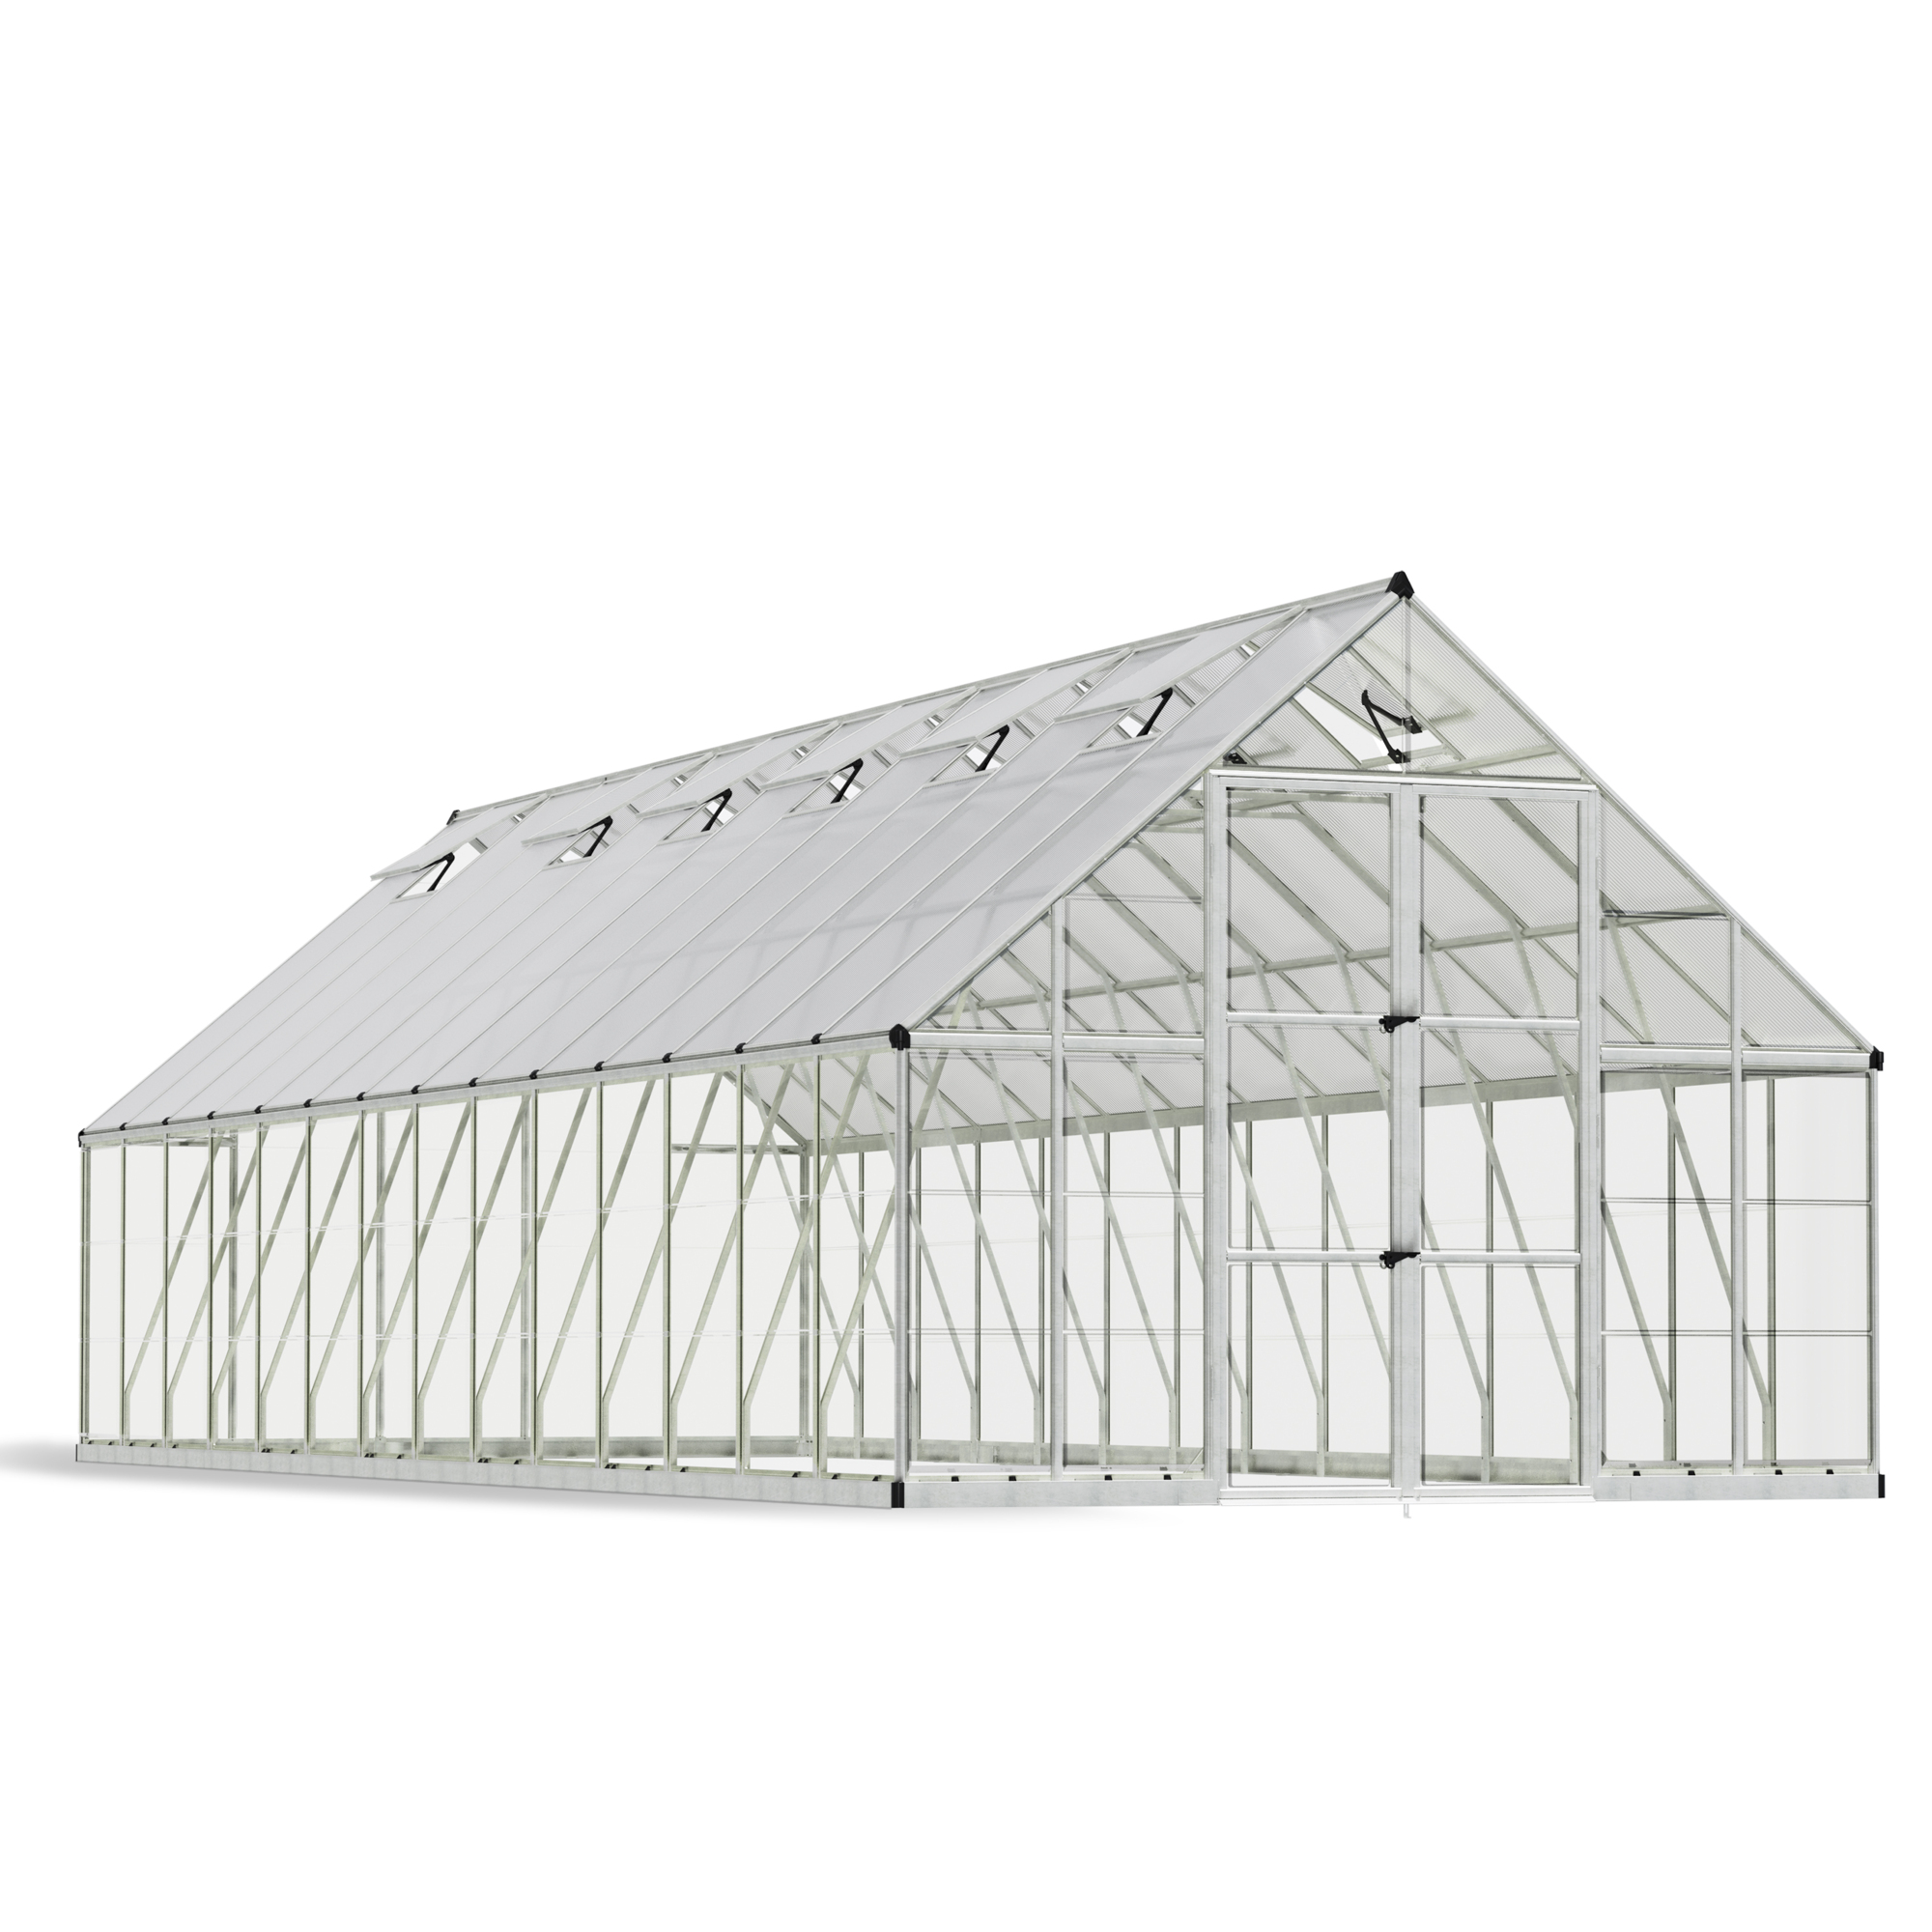 Poly-Tex Inc., Balance 10ft. x 28ft. Greenhouse - Silver, Length 332.3 in, Width 119.7 in, Center Height 101.2 in, Model 707015